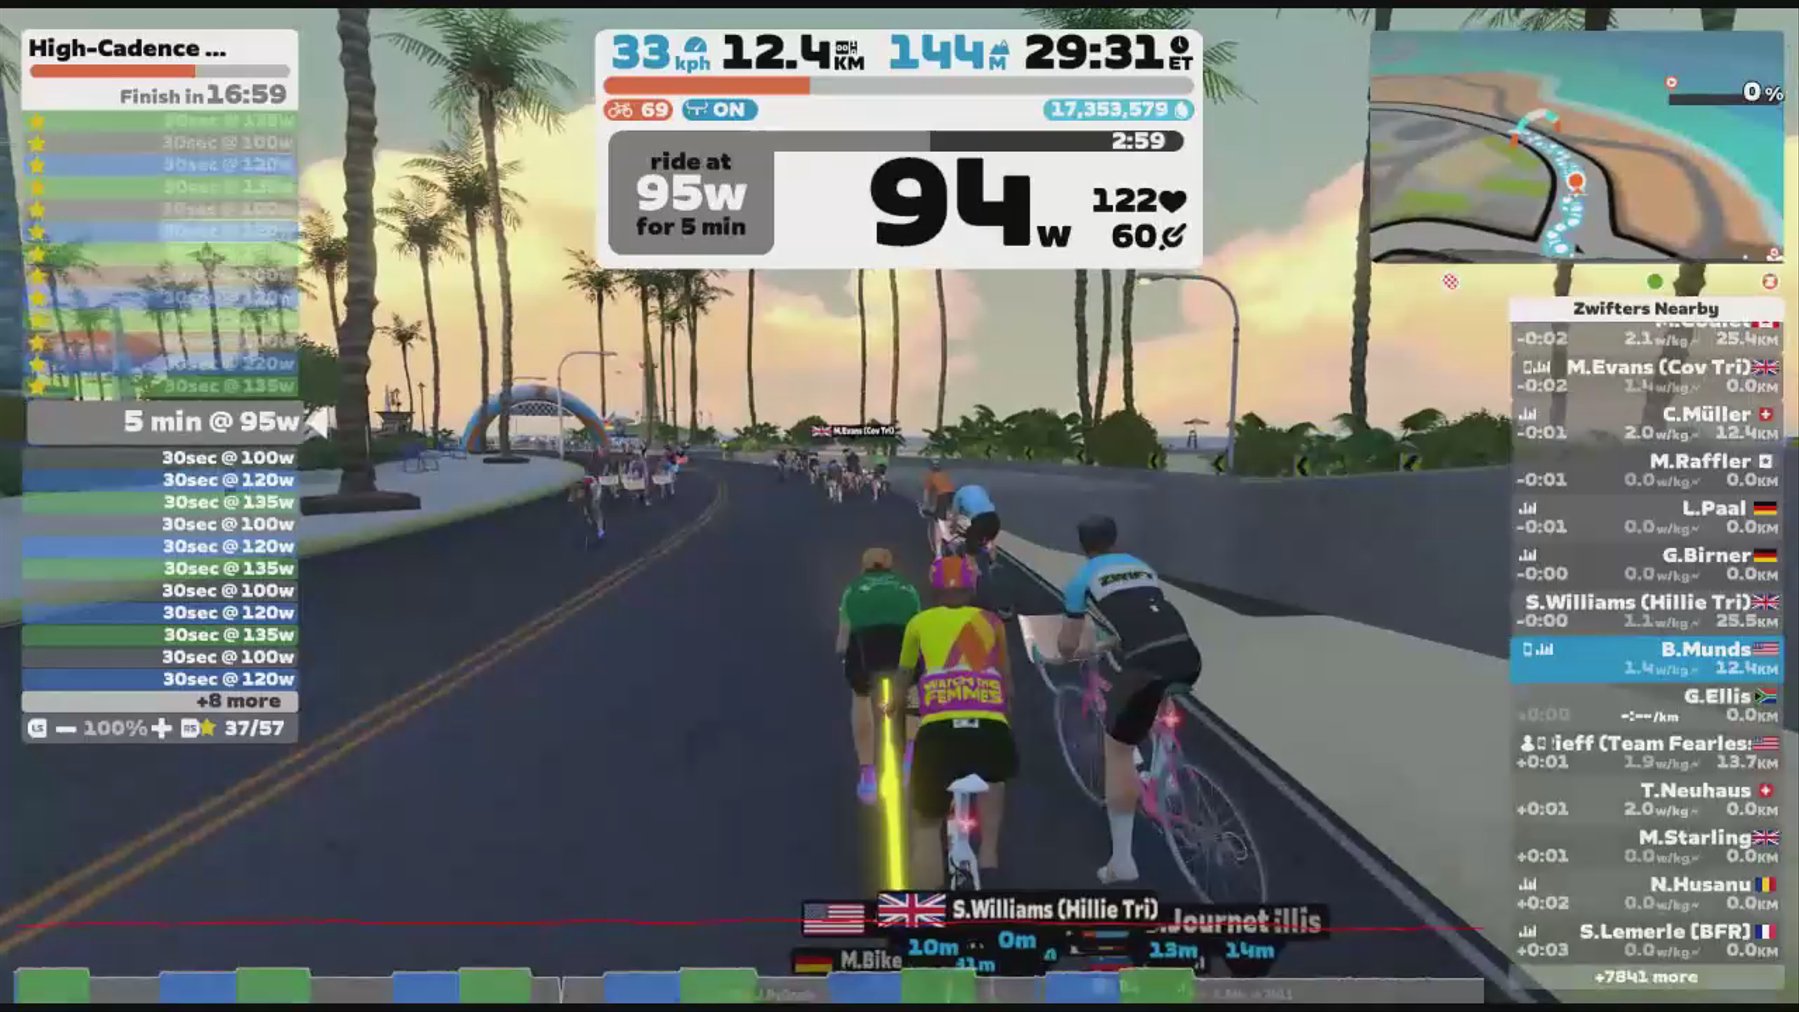 Zwift - High-Cadence Builds in Watopia